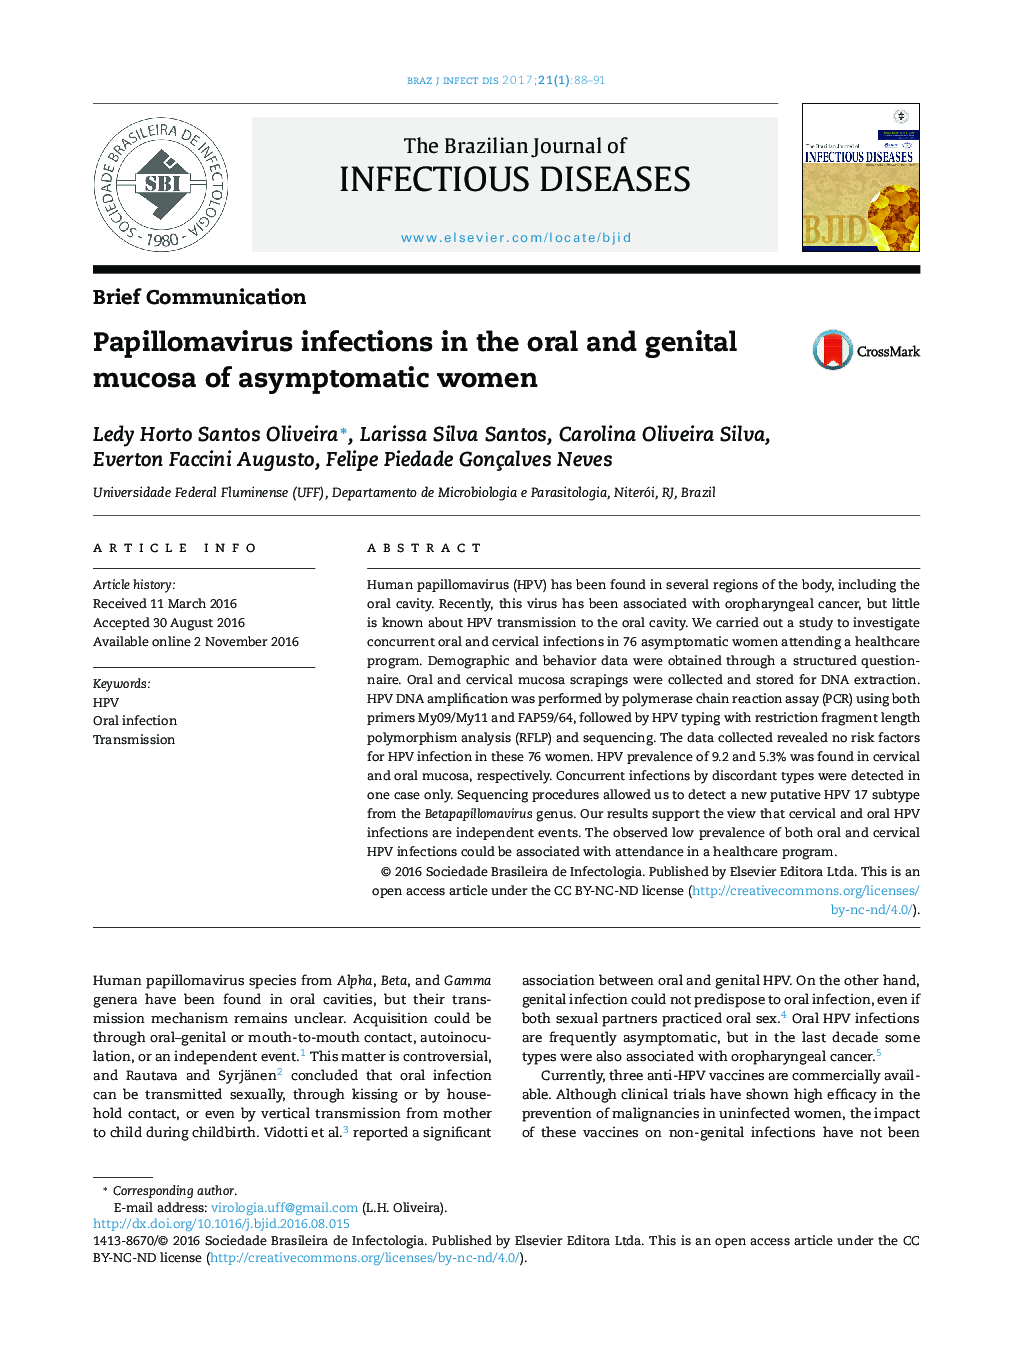 Papillomavirus infections in the oral and genital mucosa of asymptomatic women